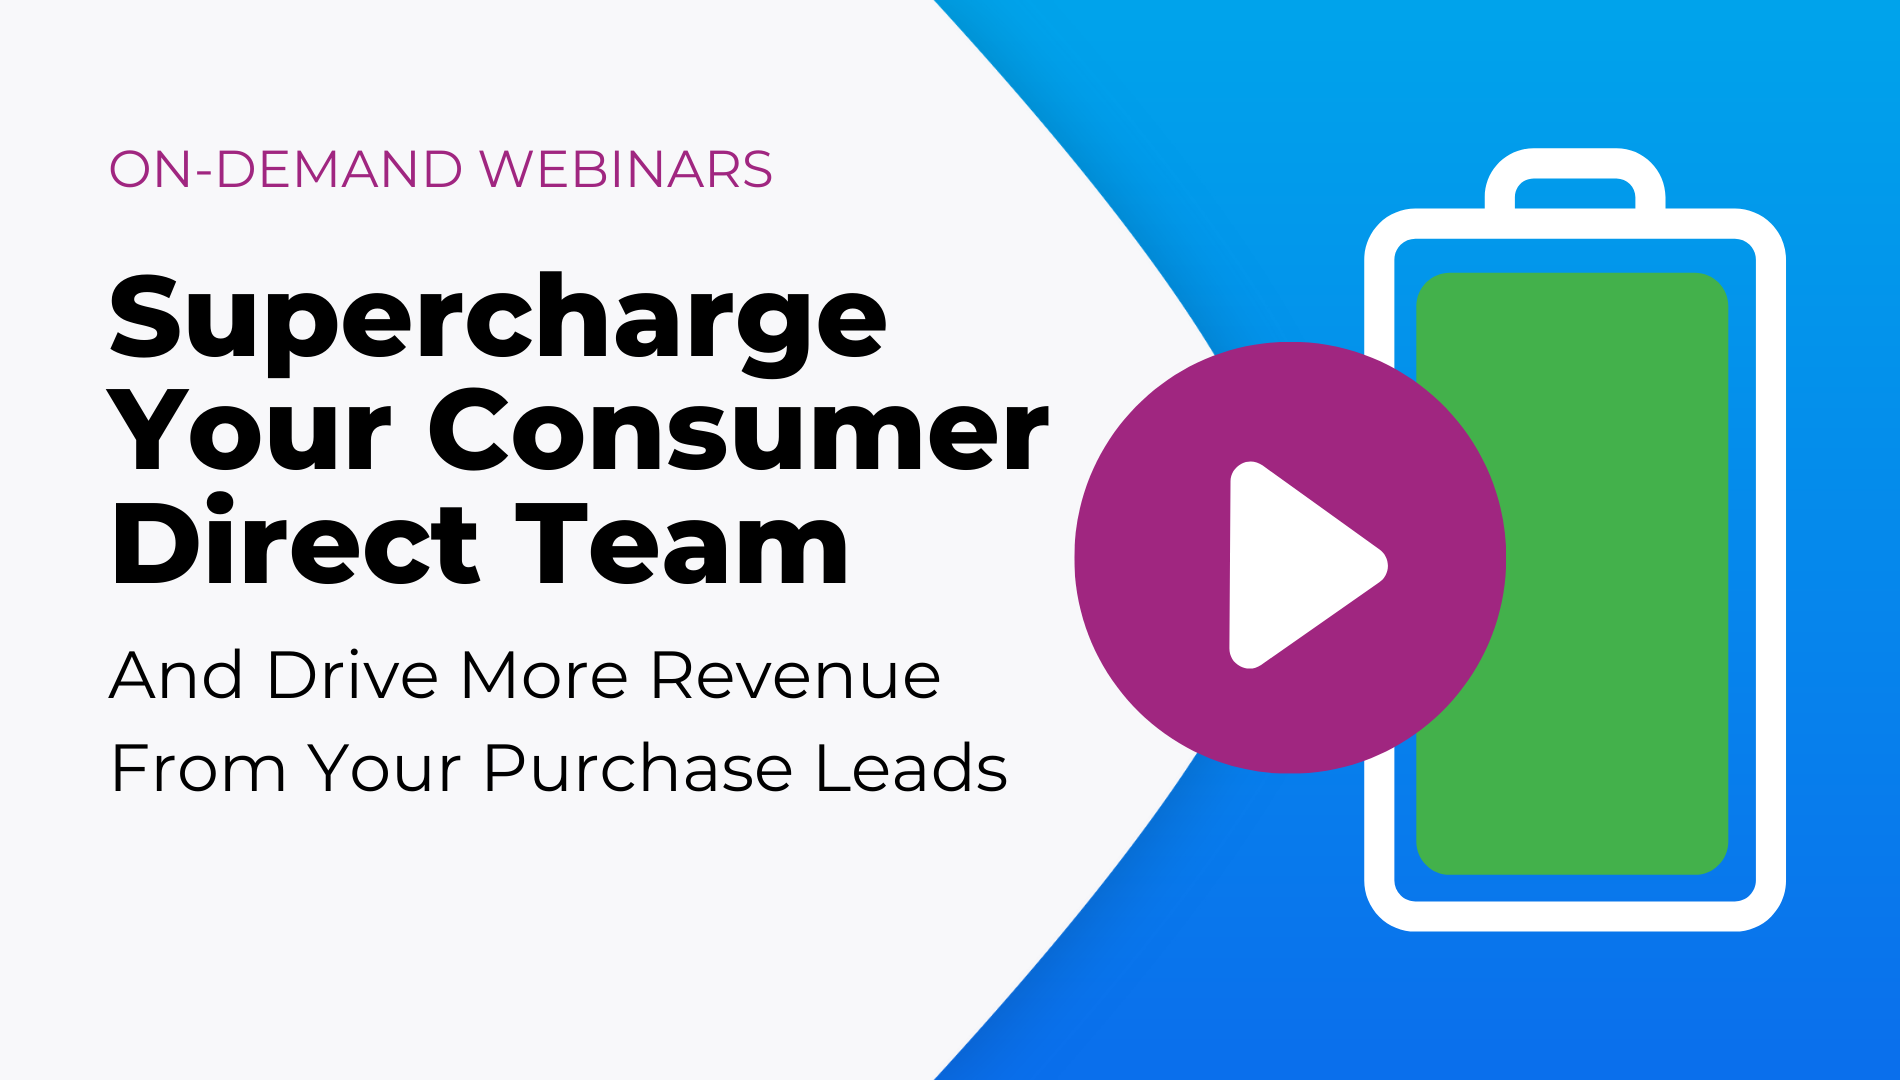 Supercharge your Consumer Direct Team and Drive More Revenue from your Purchase Leads